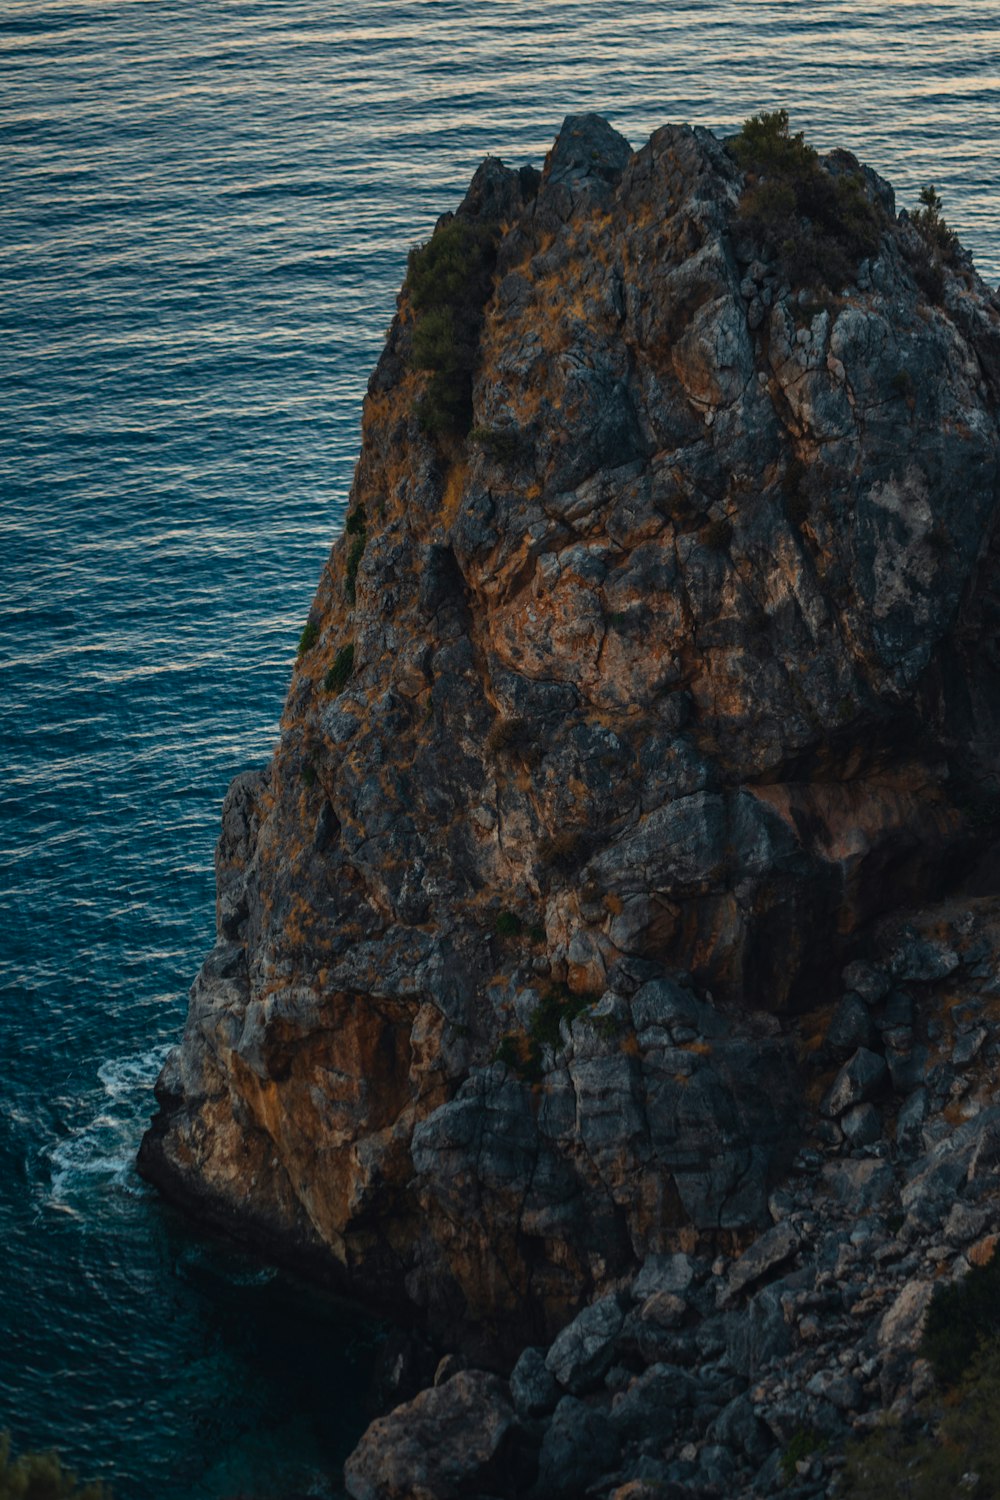 a person standing on top of a large rock next to the ocean